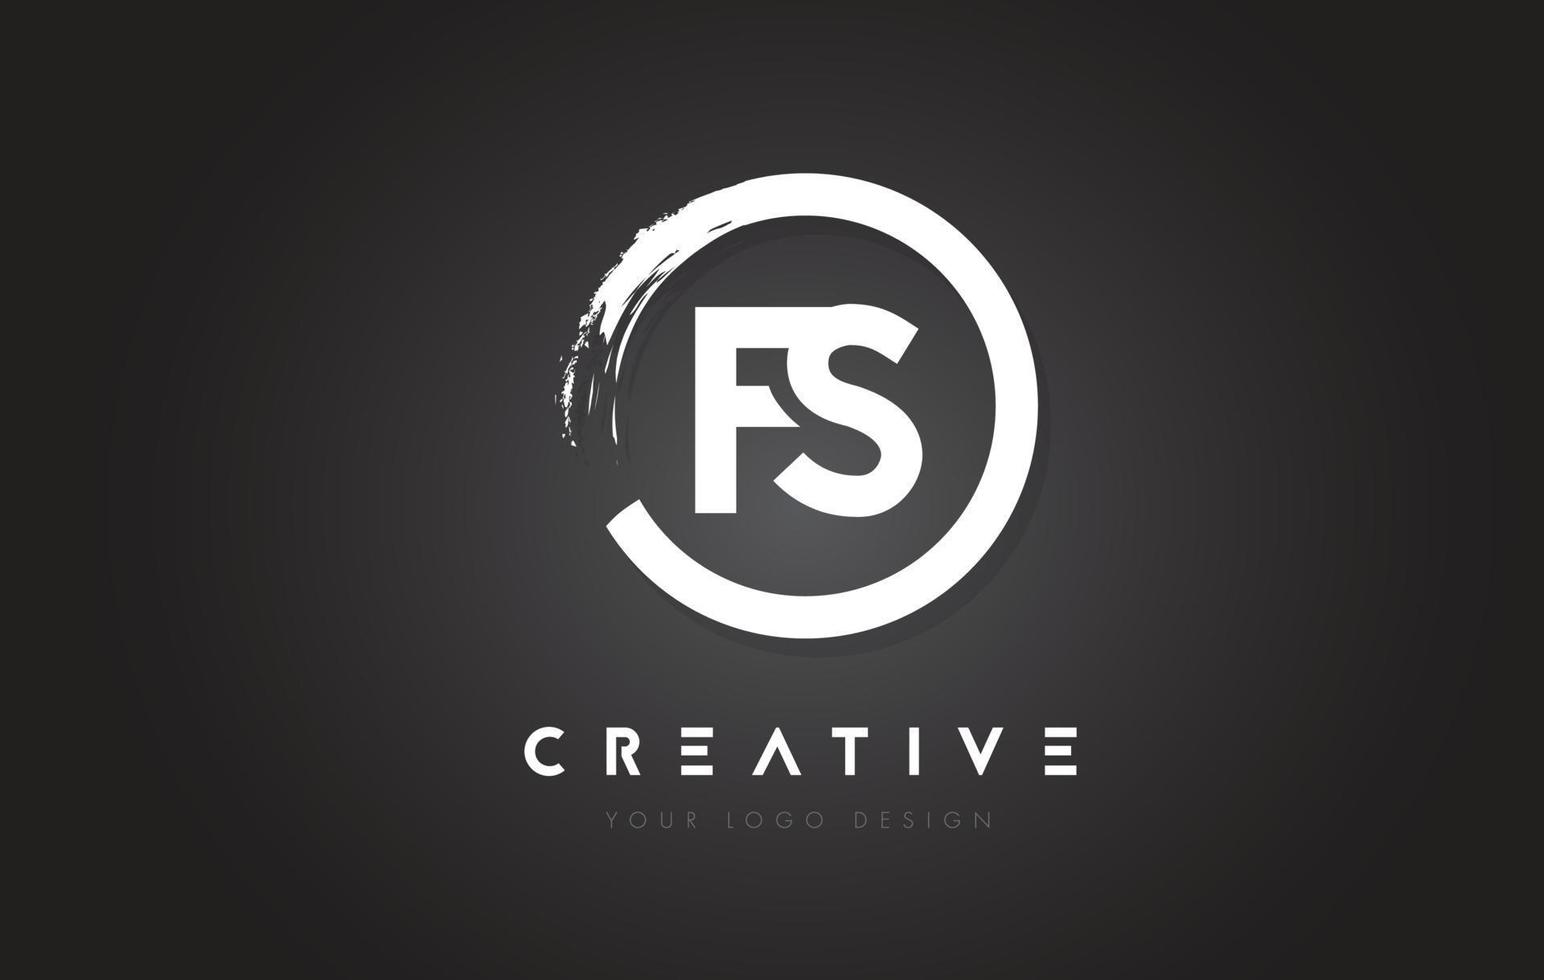 FS Circular Letter Logo with Circle Brush Design and Black Background. vector